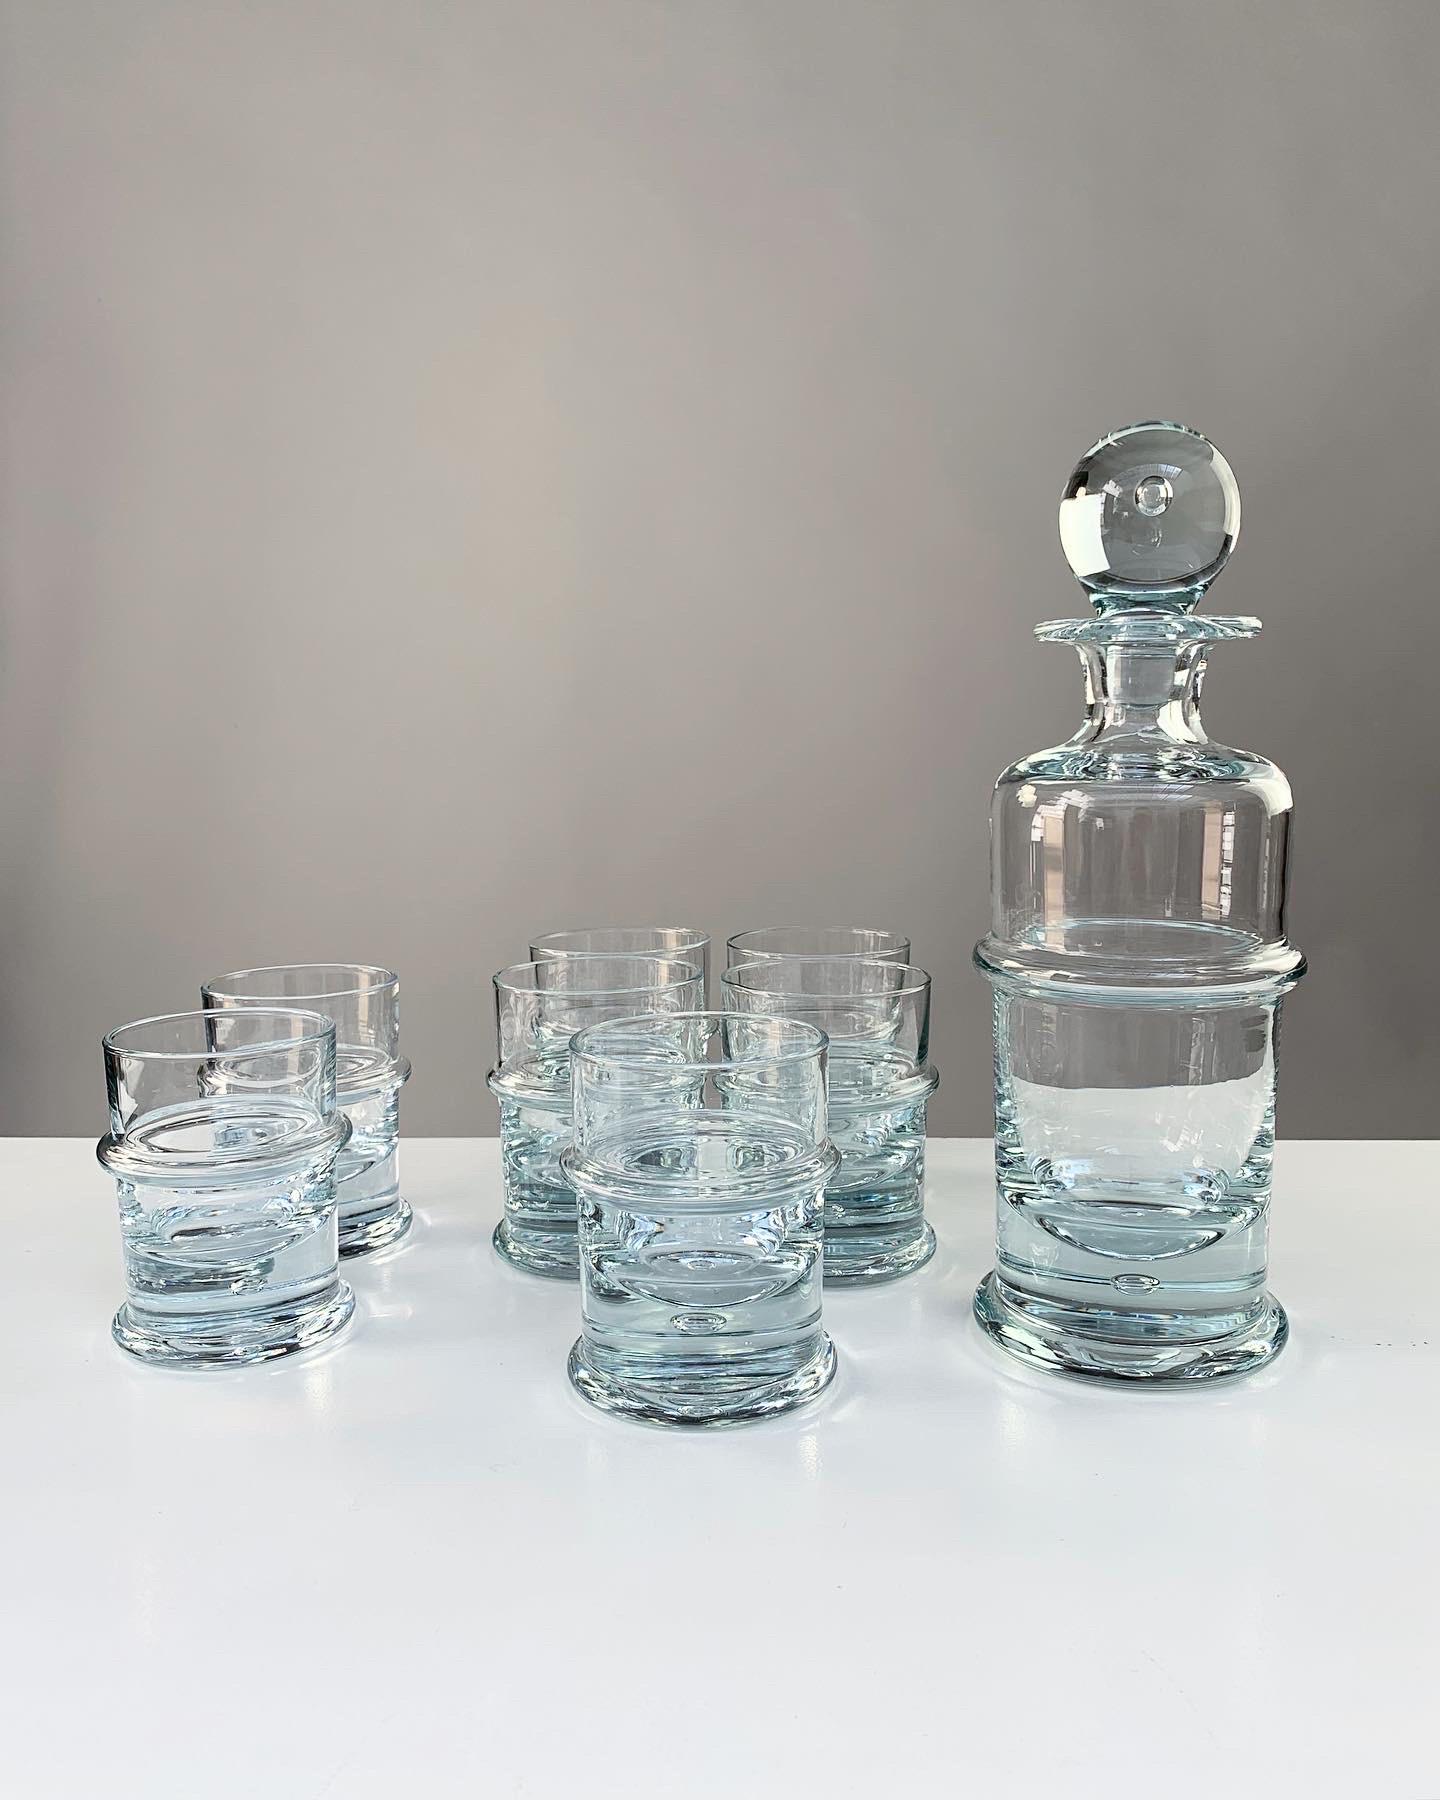 Sidse Werner bottle decanter with seven tumber glasses, model ‚Regiment‘ designed in 1972 for Holmegaard glassworks in Denmark.

Made of heavy crystal glass, each piece has an enclosed bubble in the bottom, including the bottle stopper.

The